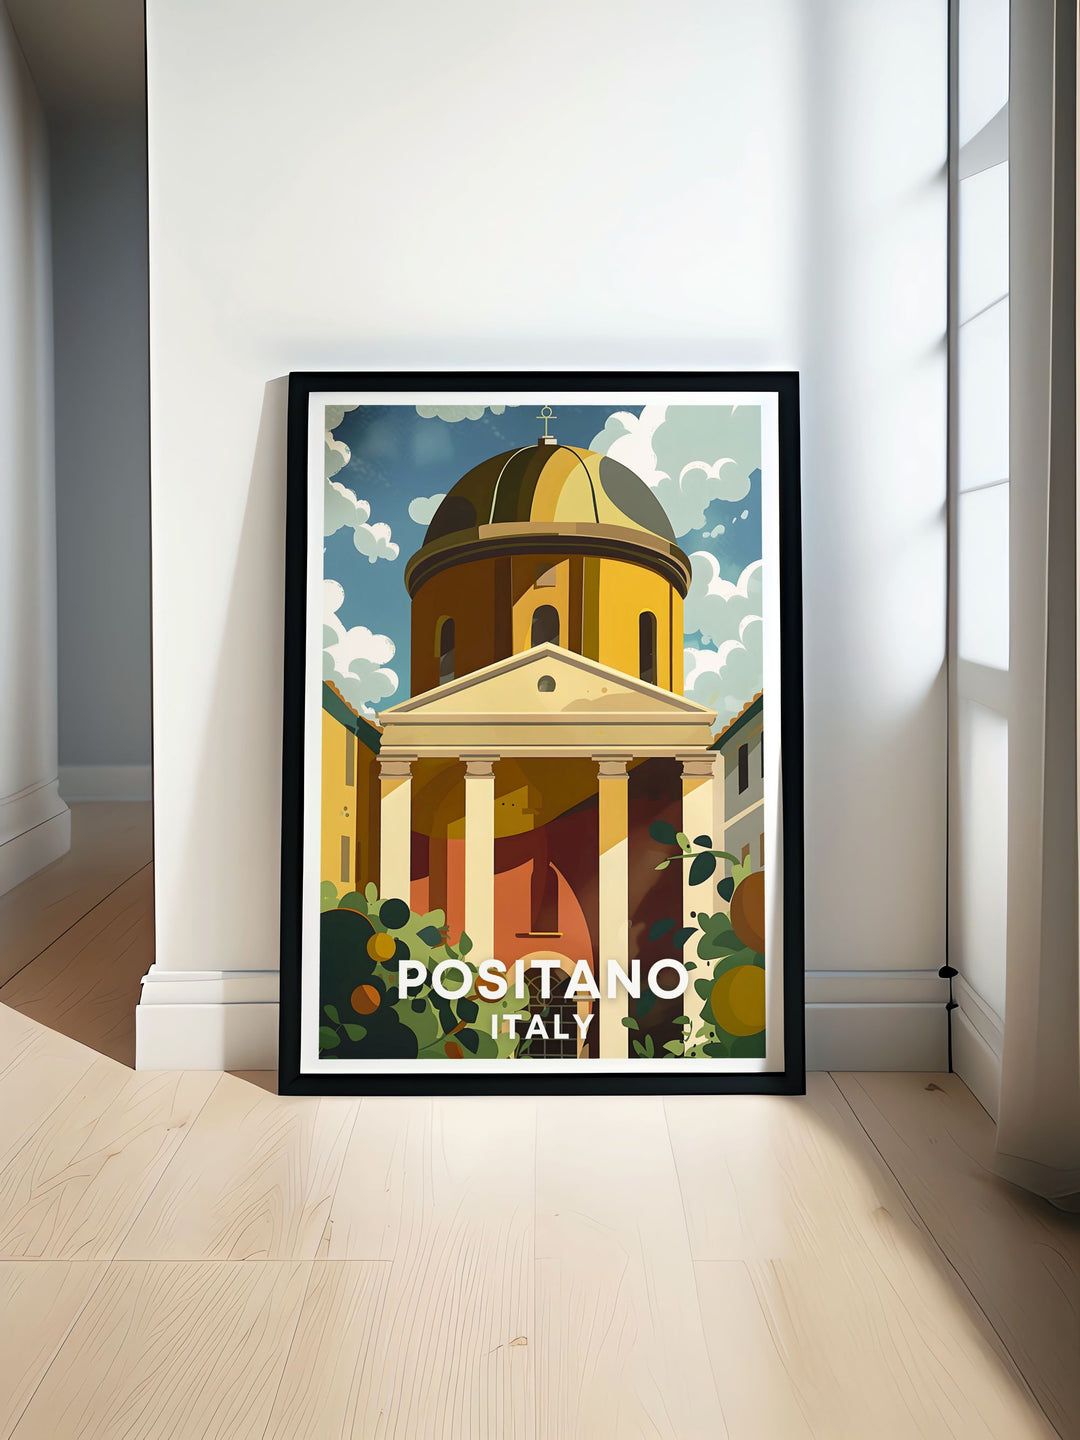 Positano art print showcasing The Chiesa di Santa Maria Assunta with its iconic dome ideal for adding a touch of Italian charm to your home decor perfect for wall decor that evokes the timeless beauty of the Amalfi Coast